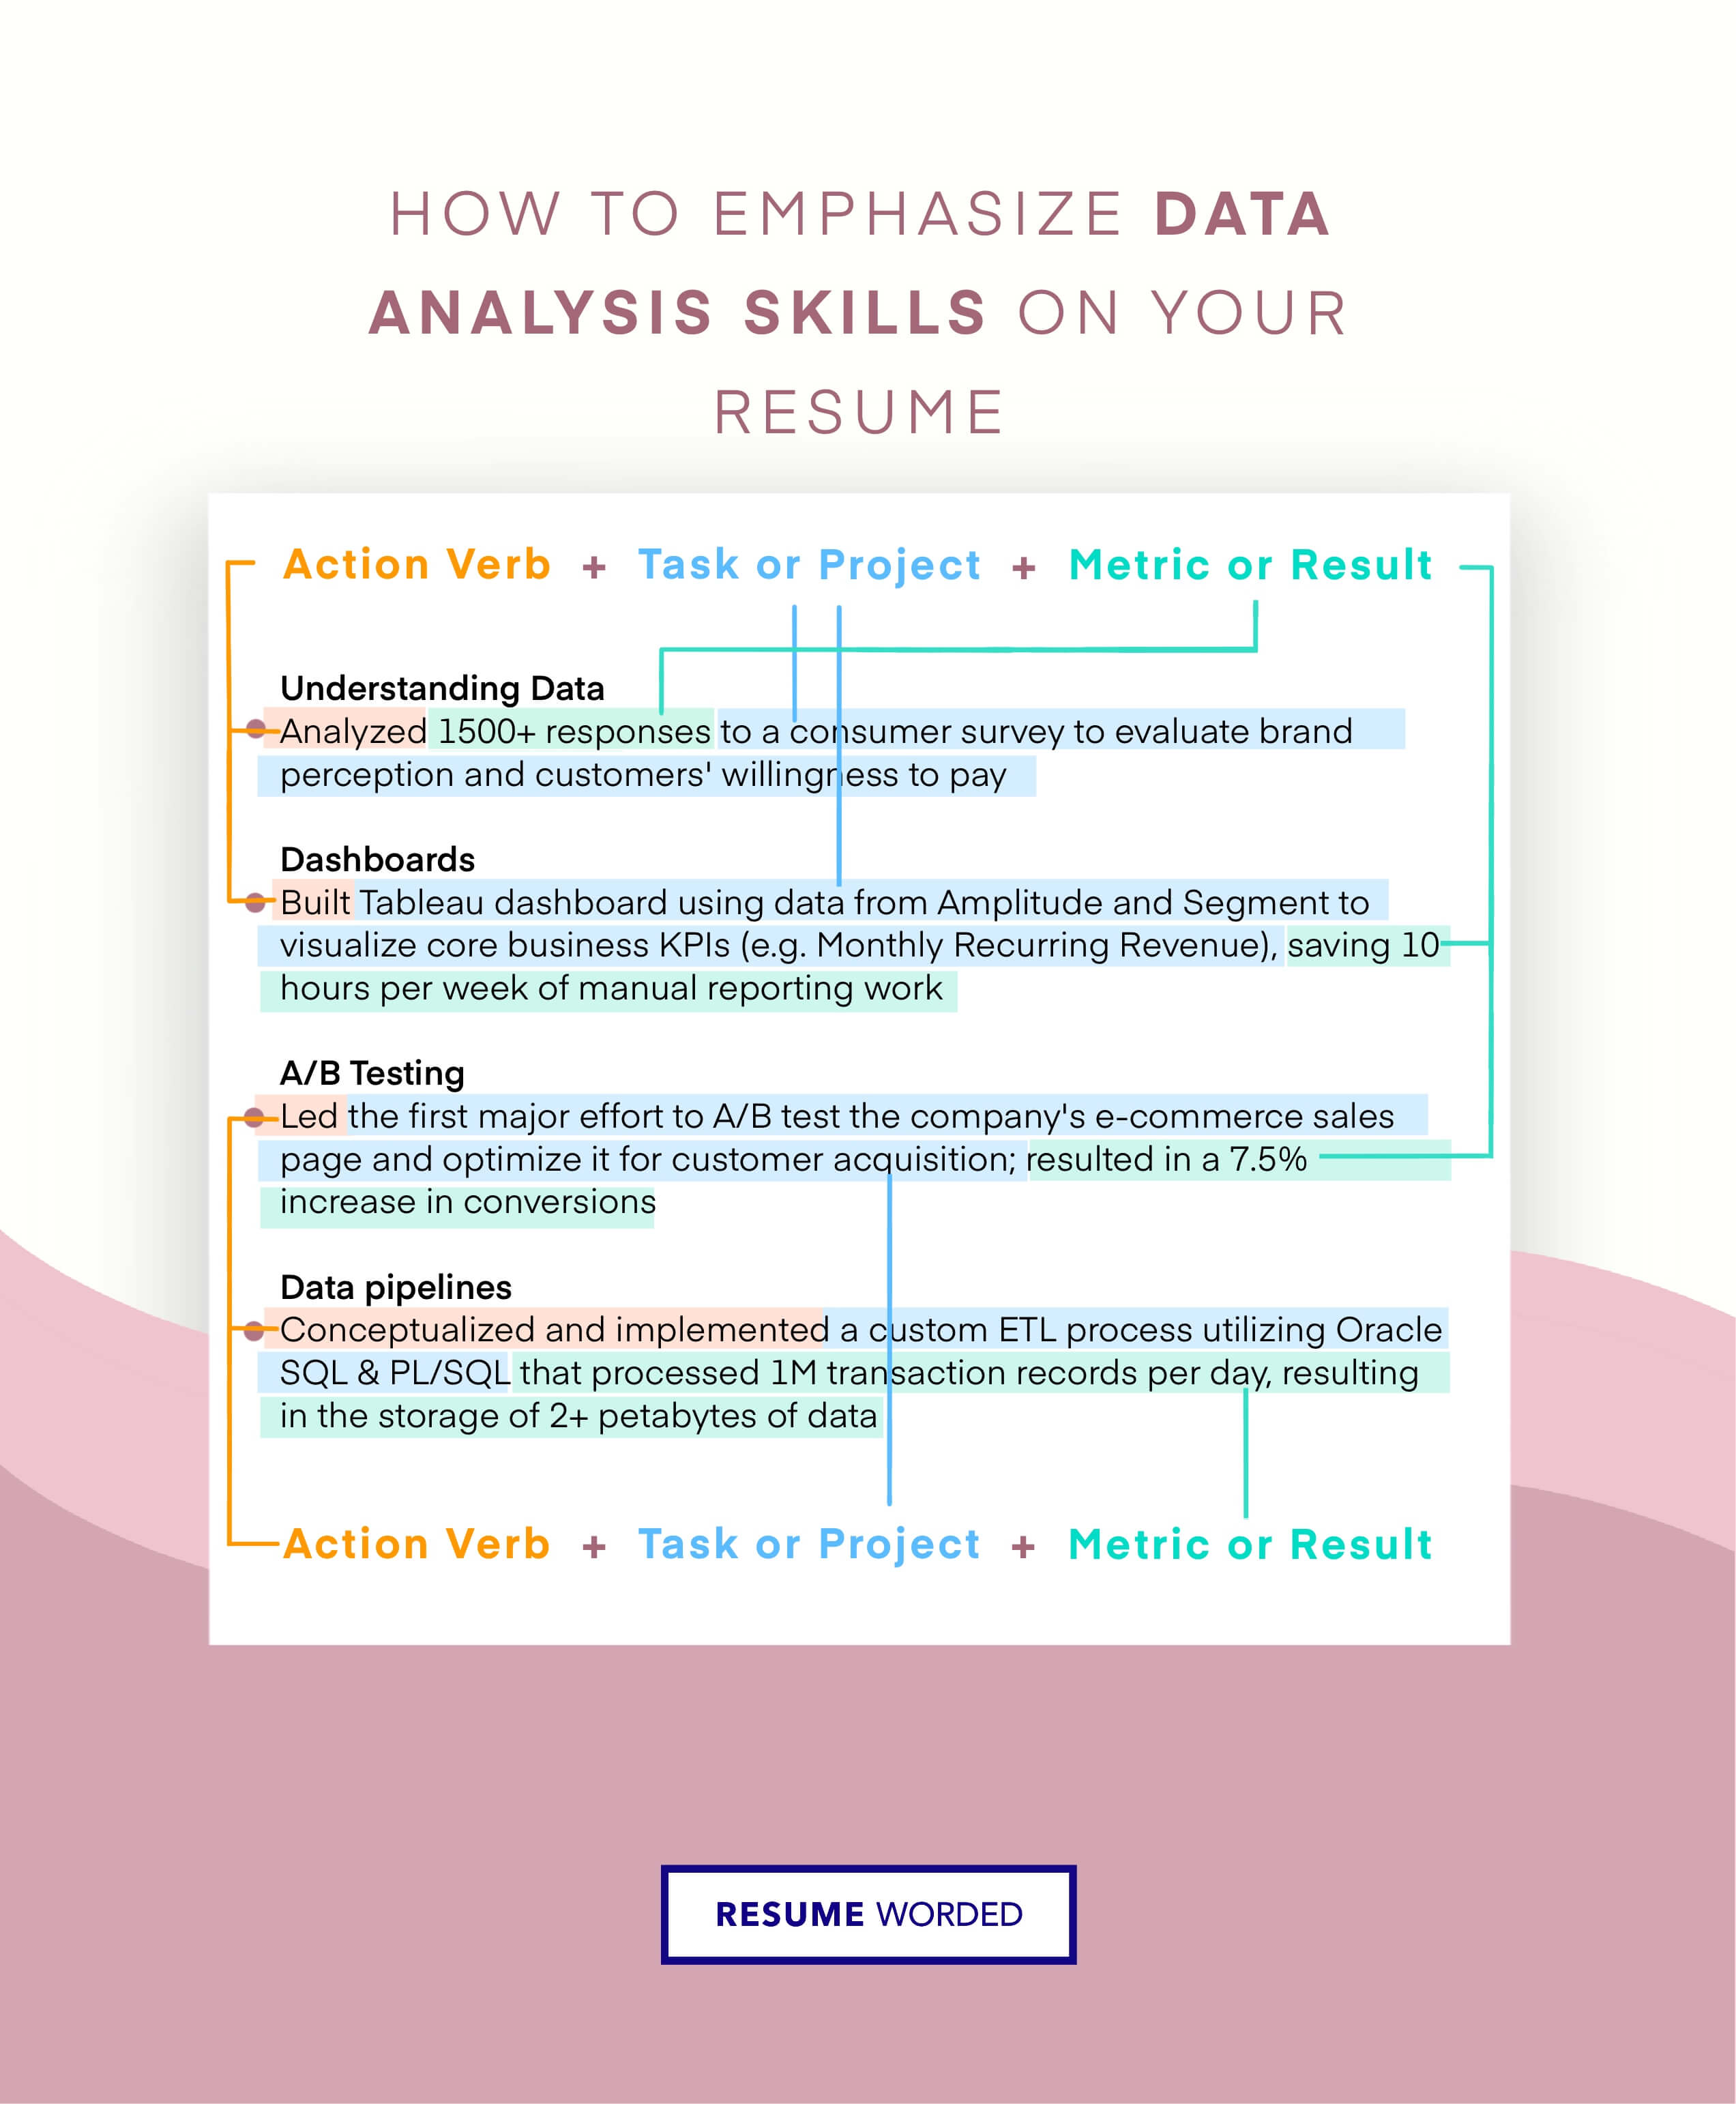 Demonstrate proficiency in data analysis tools - Technical Demand Planning Manager CV